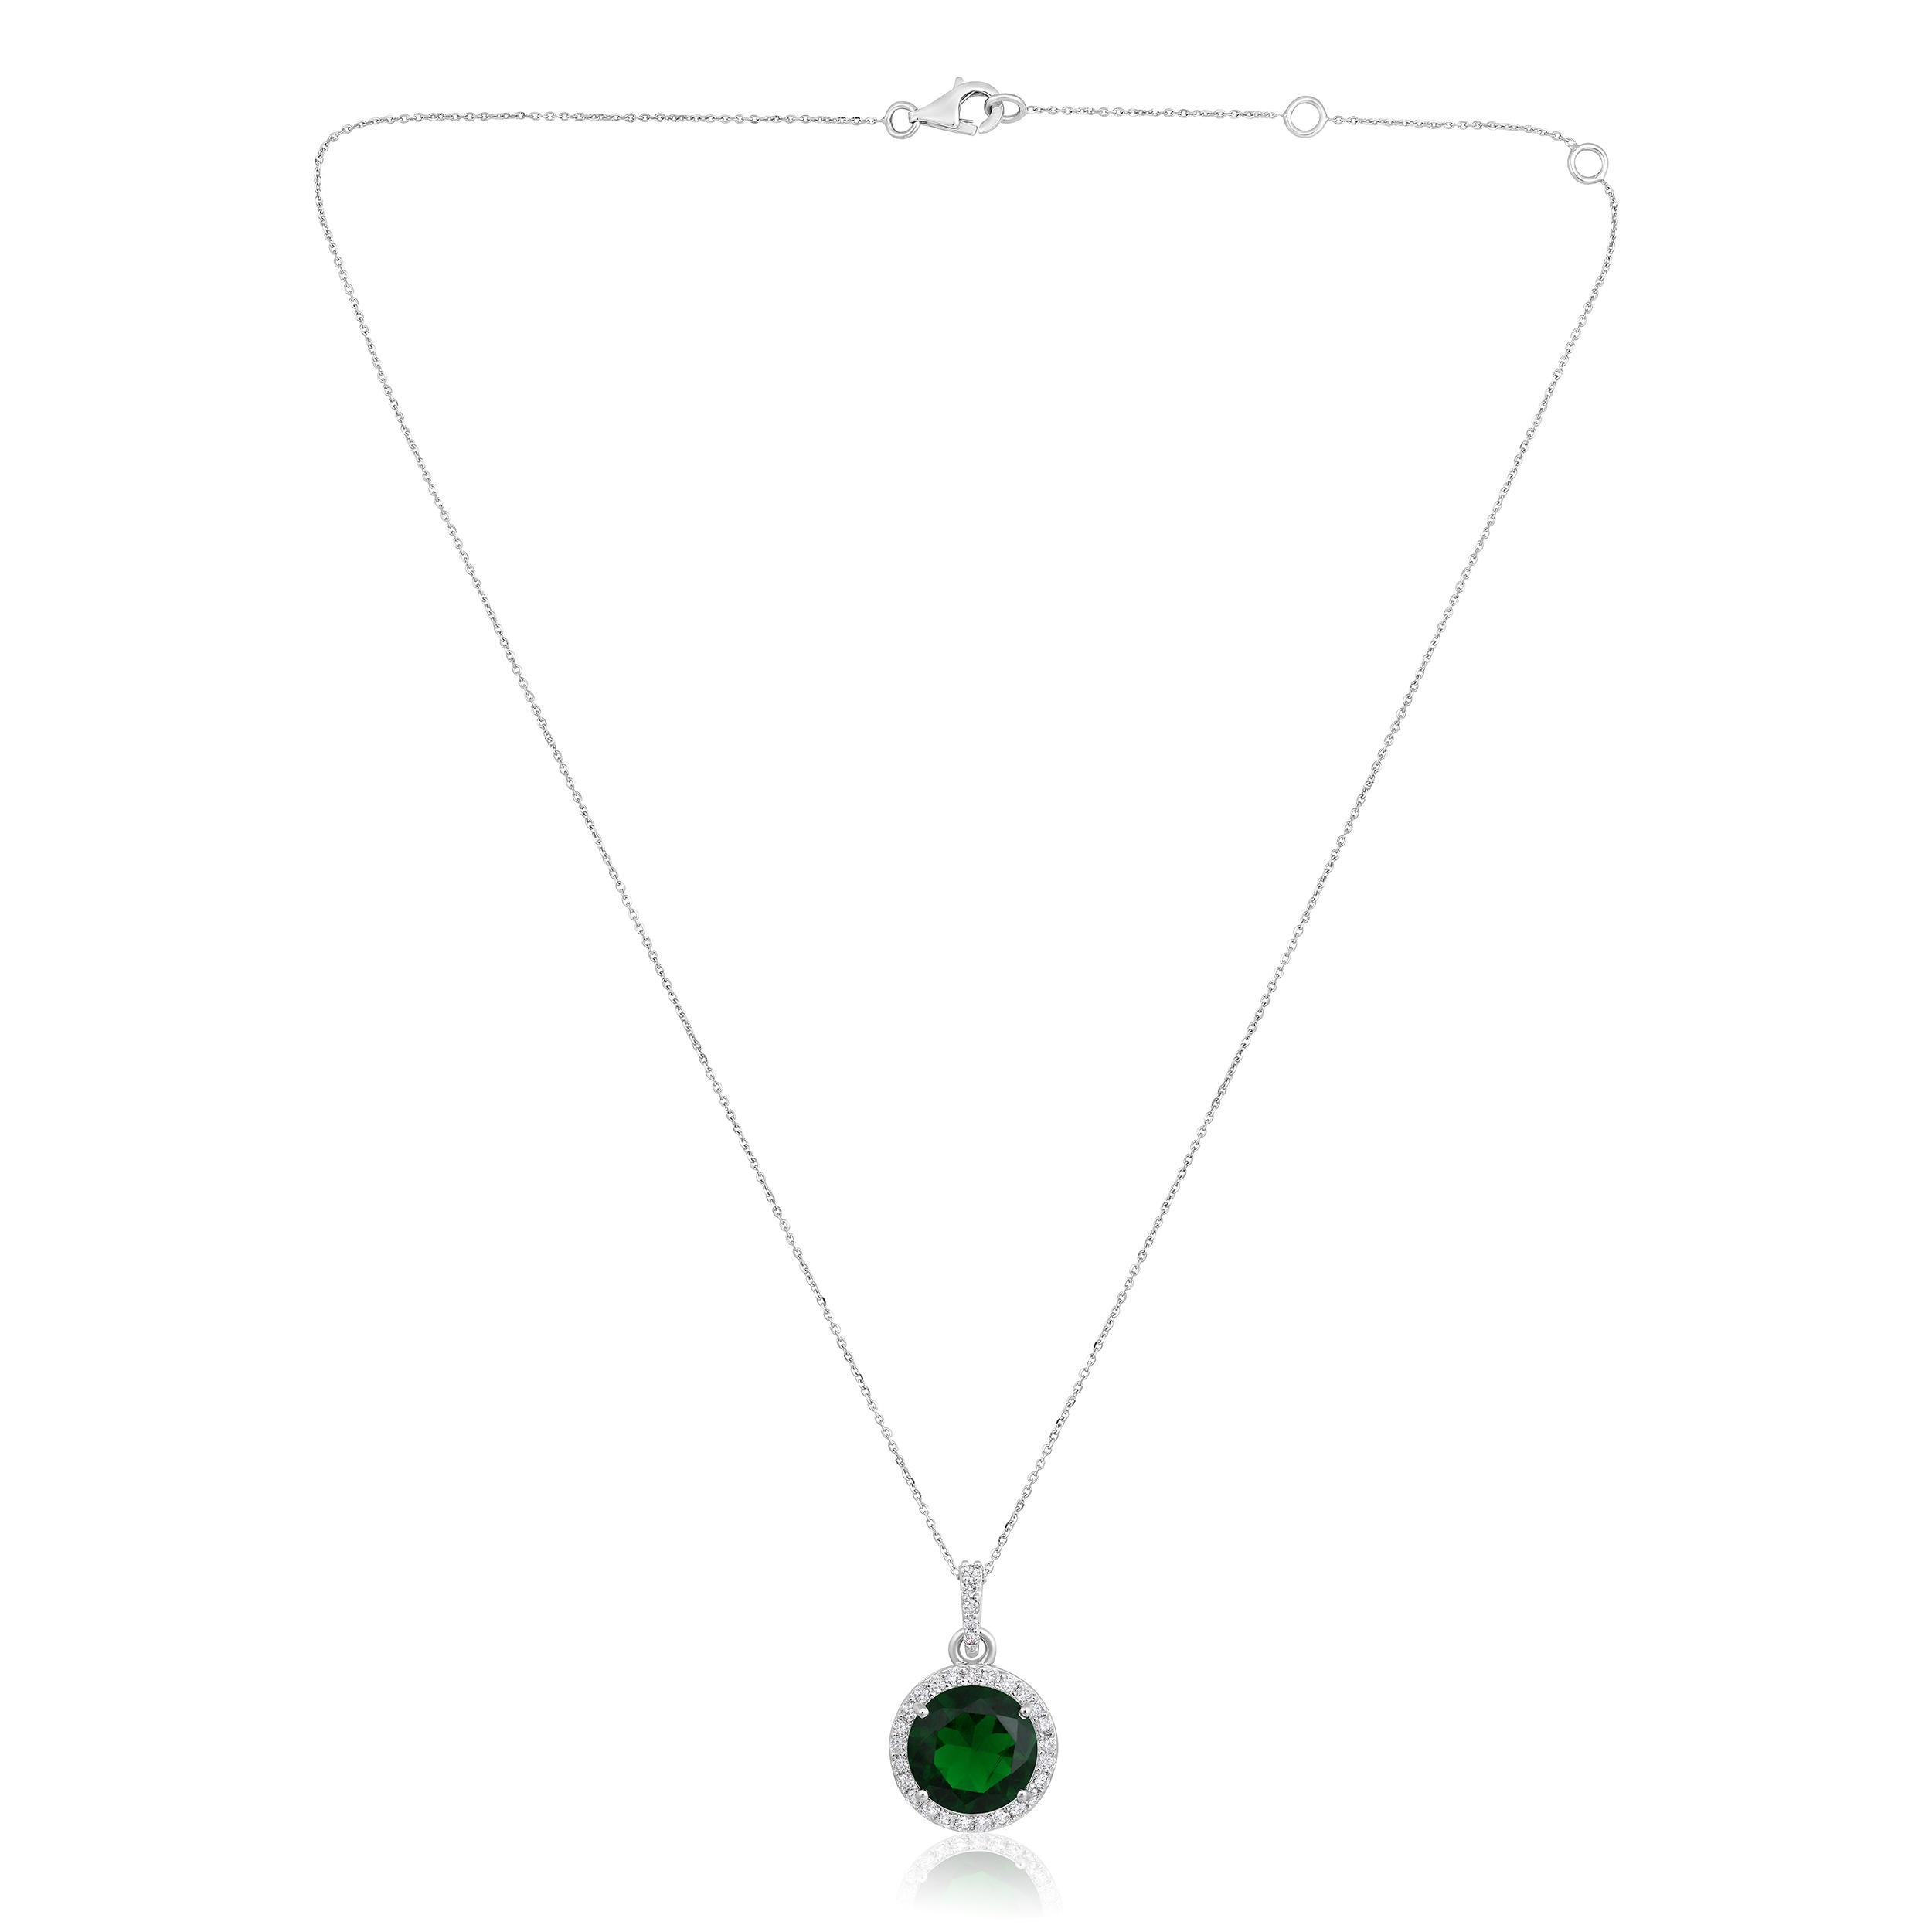 Crafted in 3.51 grams of 14K White Gold, the necklace contains 30 stones of Round Diamonds with a total of 0.35 carat in F-G color and I1-I2 clarity combined with 1 stone of Lab Created Emerald Gemstone with a total of 2.85 carat. The necklace